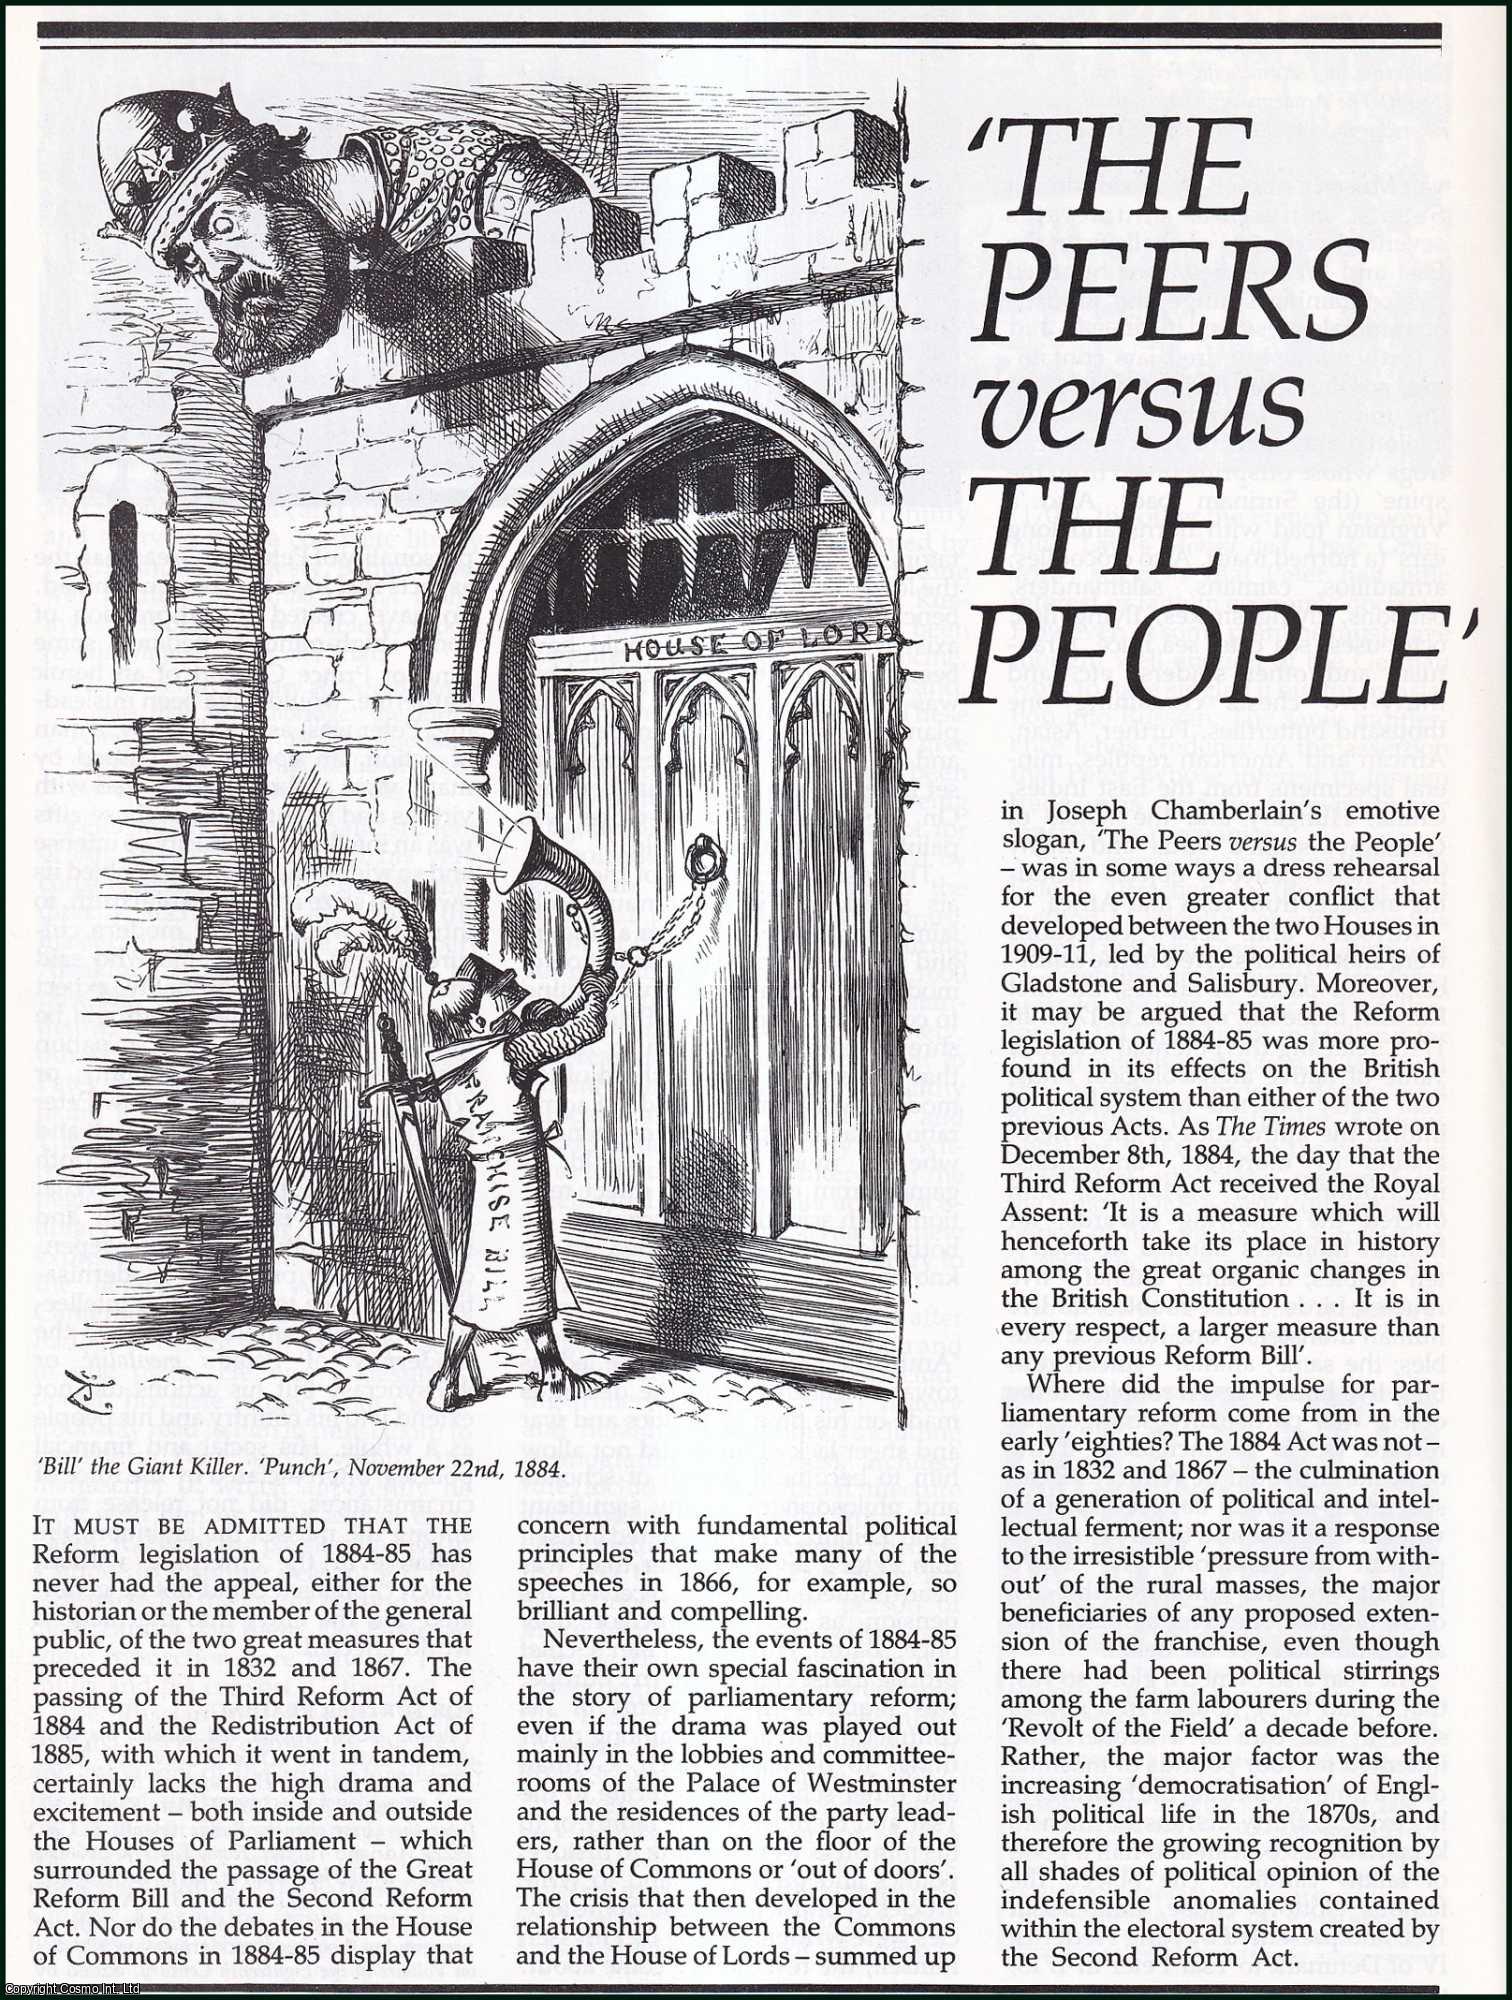 Paul Adelman - The Peers versus The People: The Reform Crisis of 1884-85. An original article from History Today, 1985.